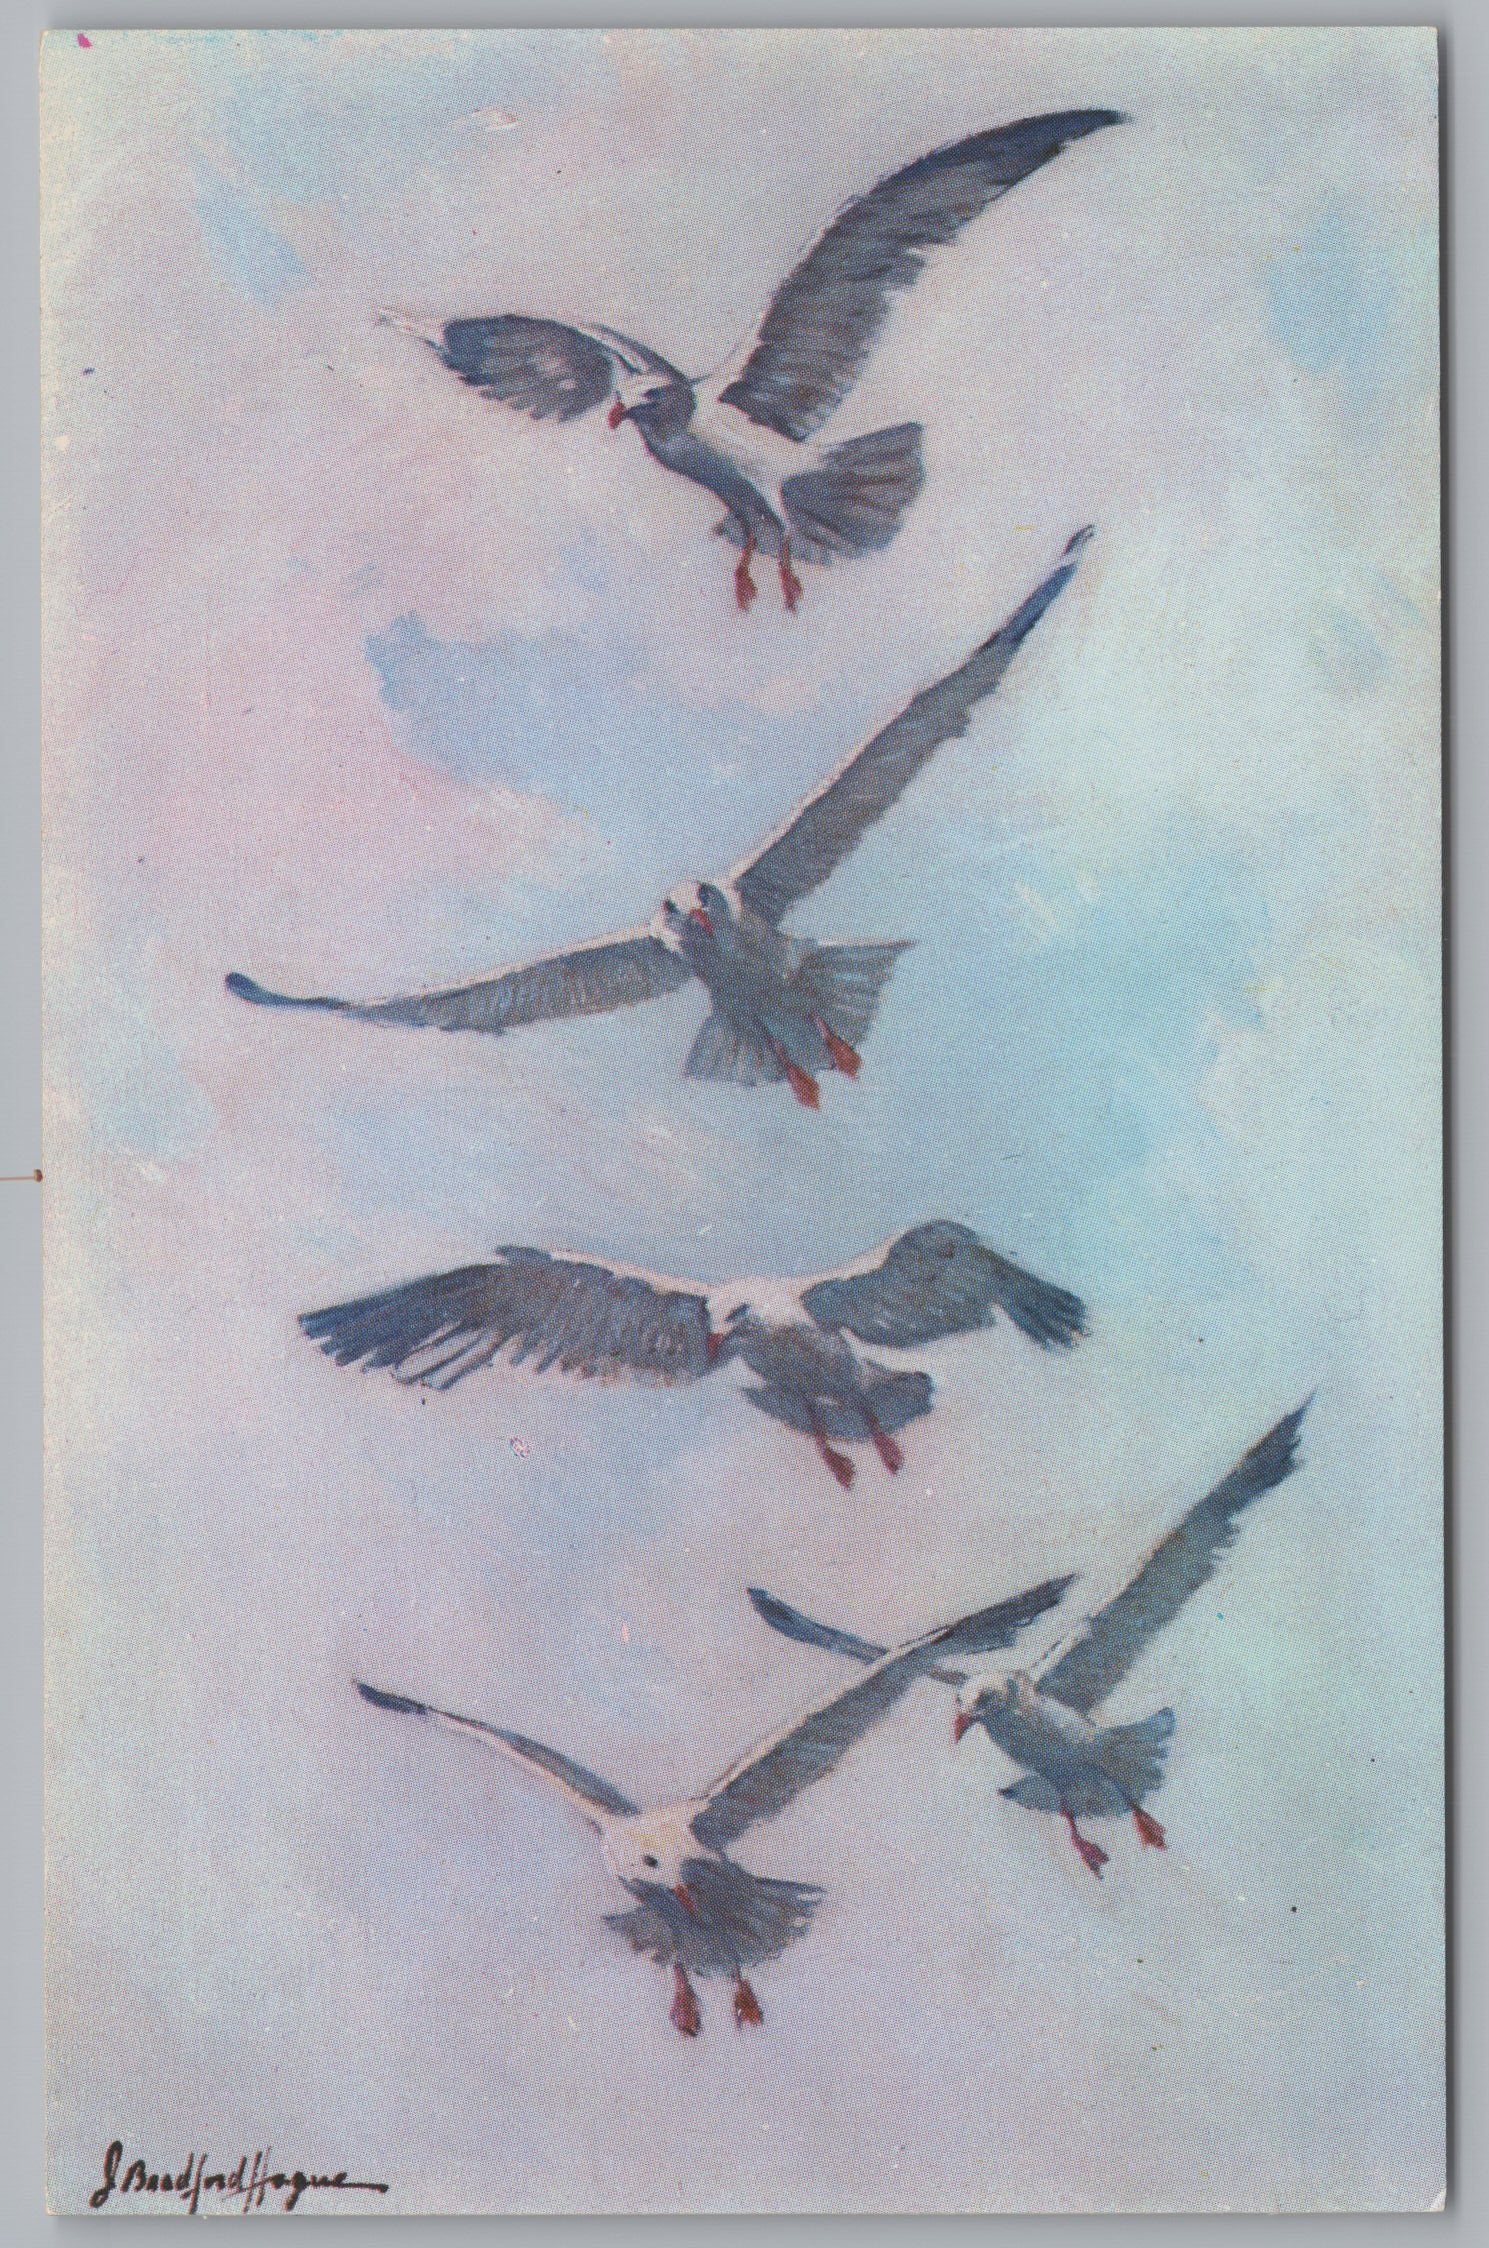 Painting Of Sea Gulls, Rockport And Gloucester, Massachusetts, Vintage Post Card.